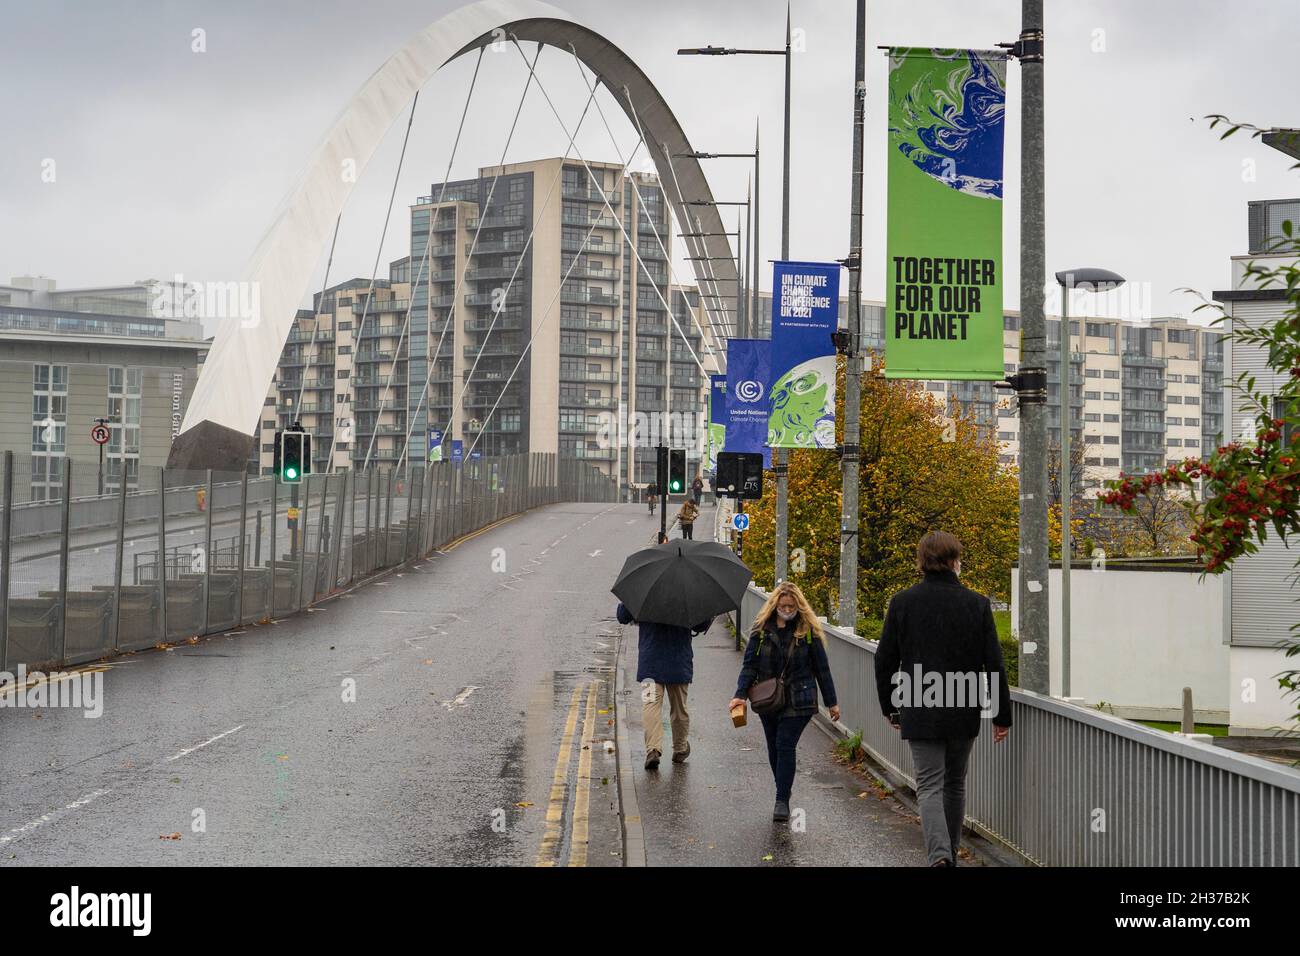 Glasgow, Scotland, UK. 26th October 2021. With less than a week to go until start of UN Climate Change Conference in Glasgow the site has been surrounded by ring of steel security fences. The adjacent Clydeside Expressway is also  closed to traffic.  Iain Masterton/Alamy Live News. Stock Photo